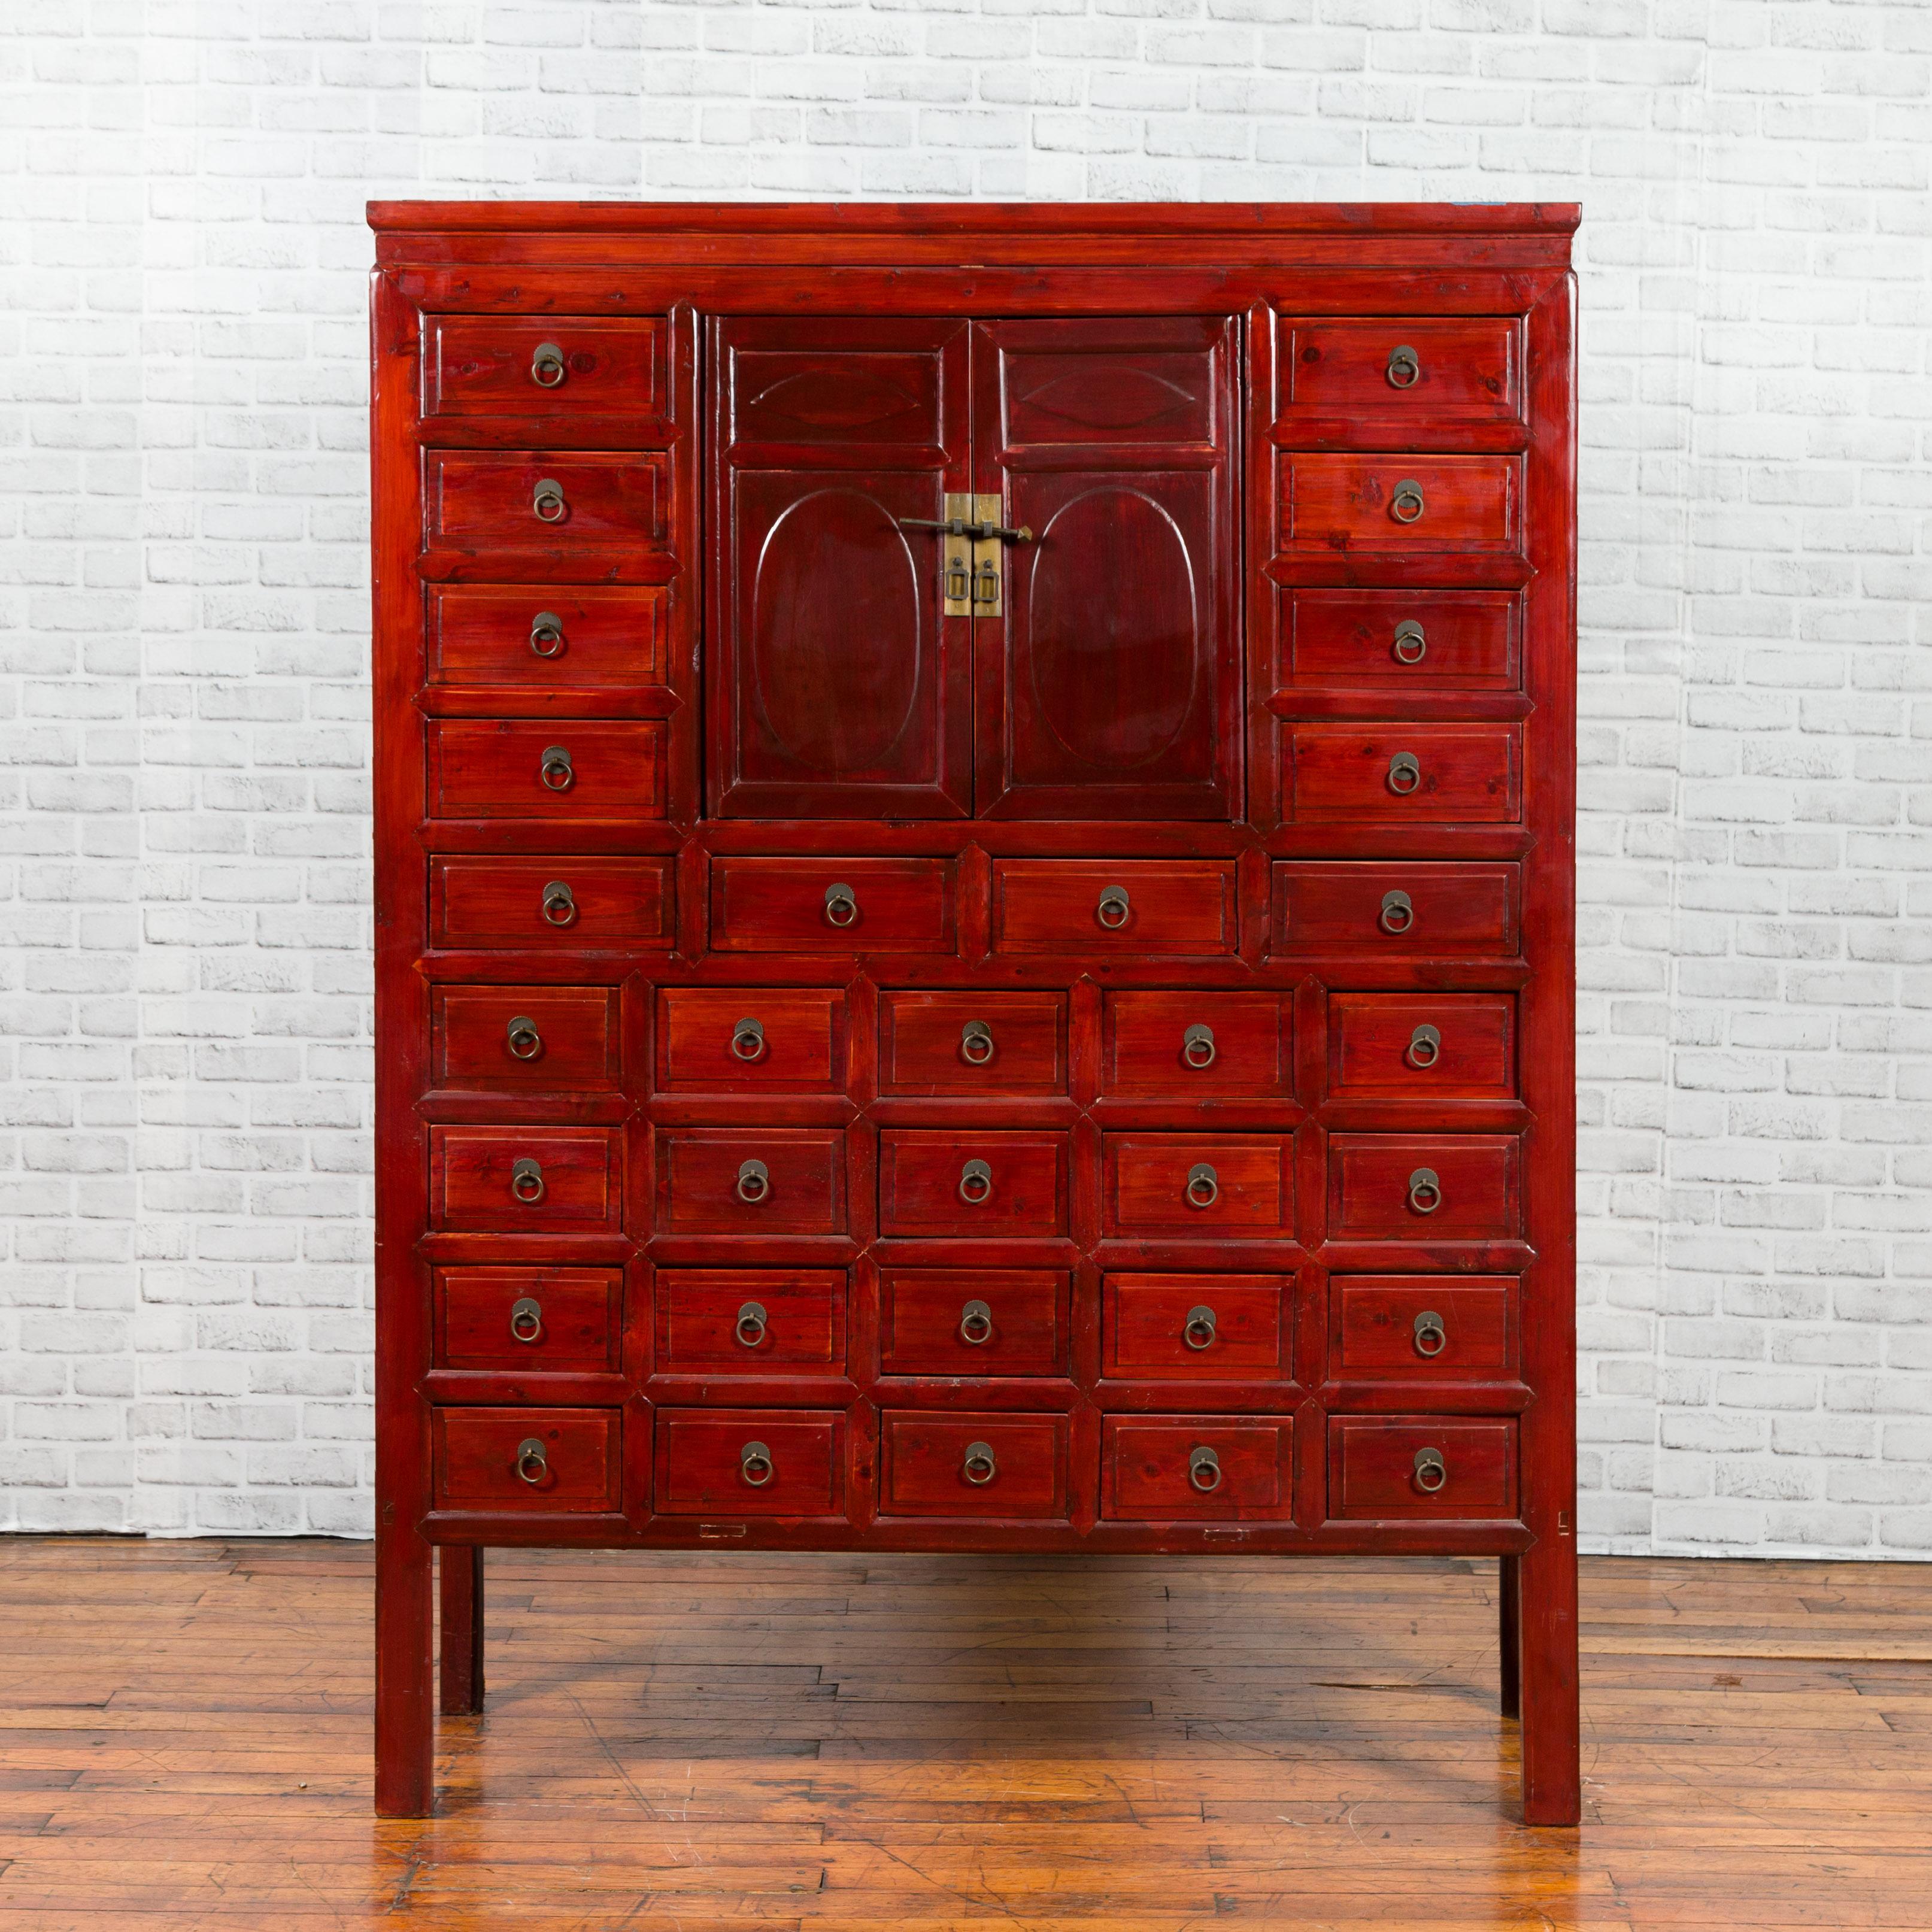 A Chinese red lacquered apothecary-inspired cabinet from the early 20th century, with 32 drawers and petite double doors. Created in China during the second quarter of the 20th century, this cabinet captures our attention with its red lacquered